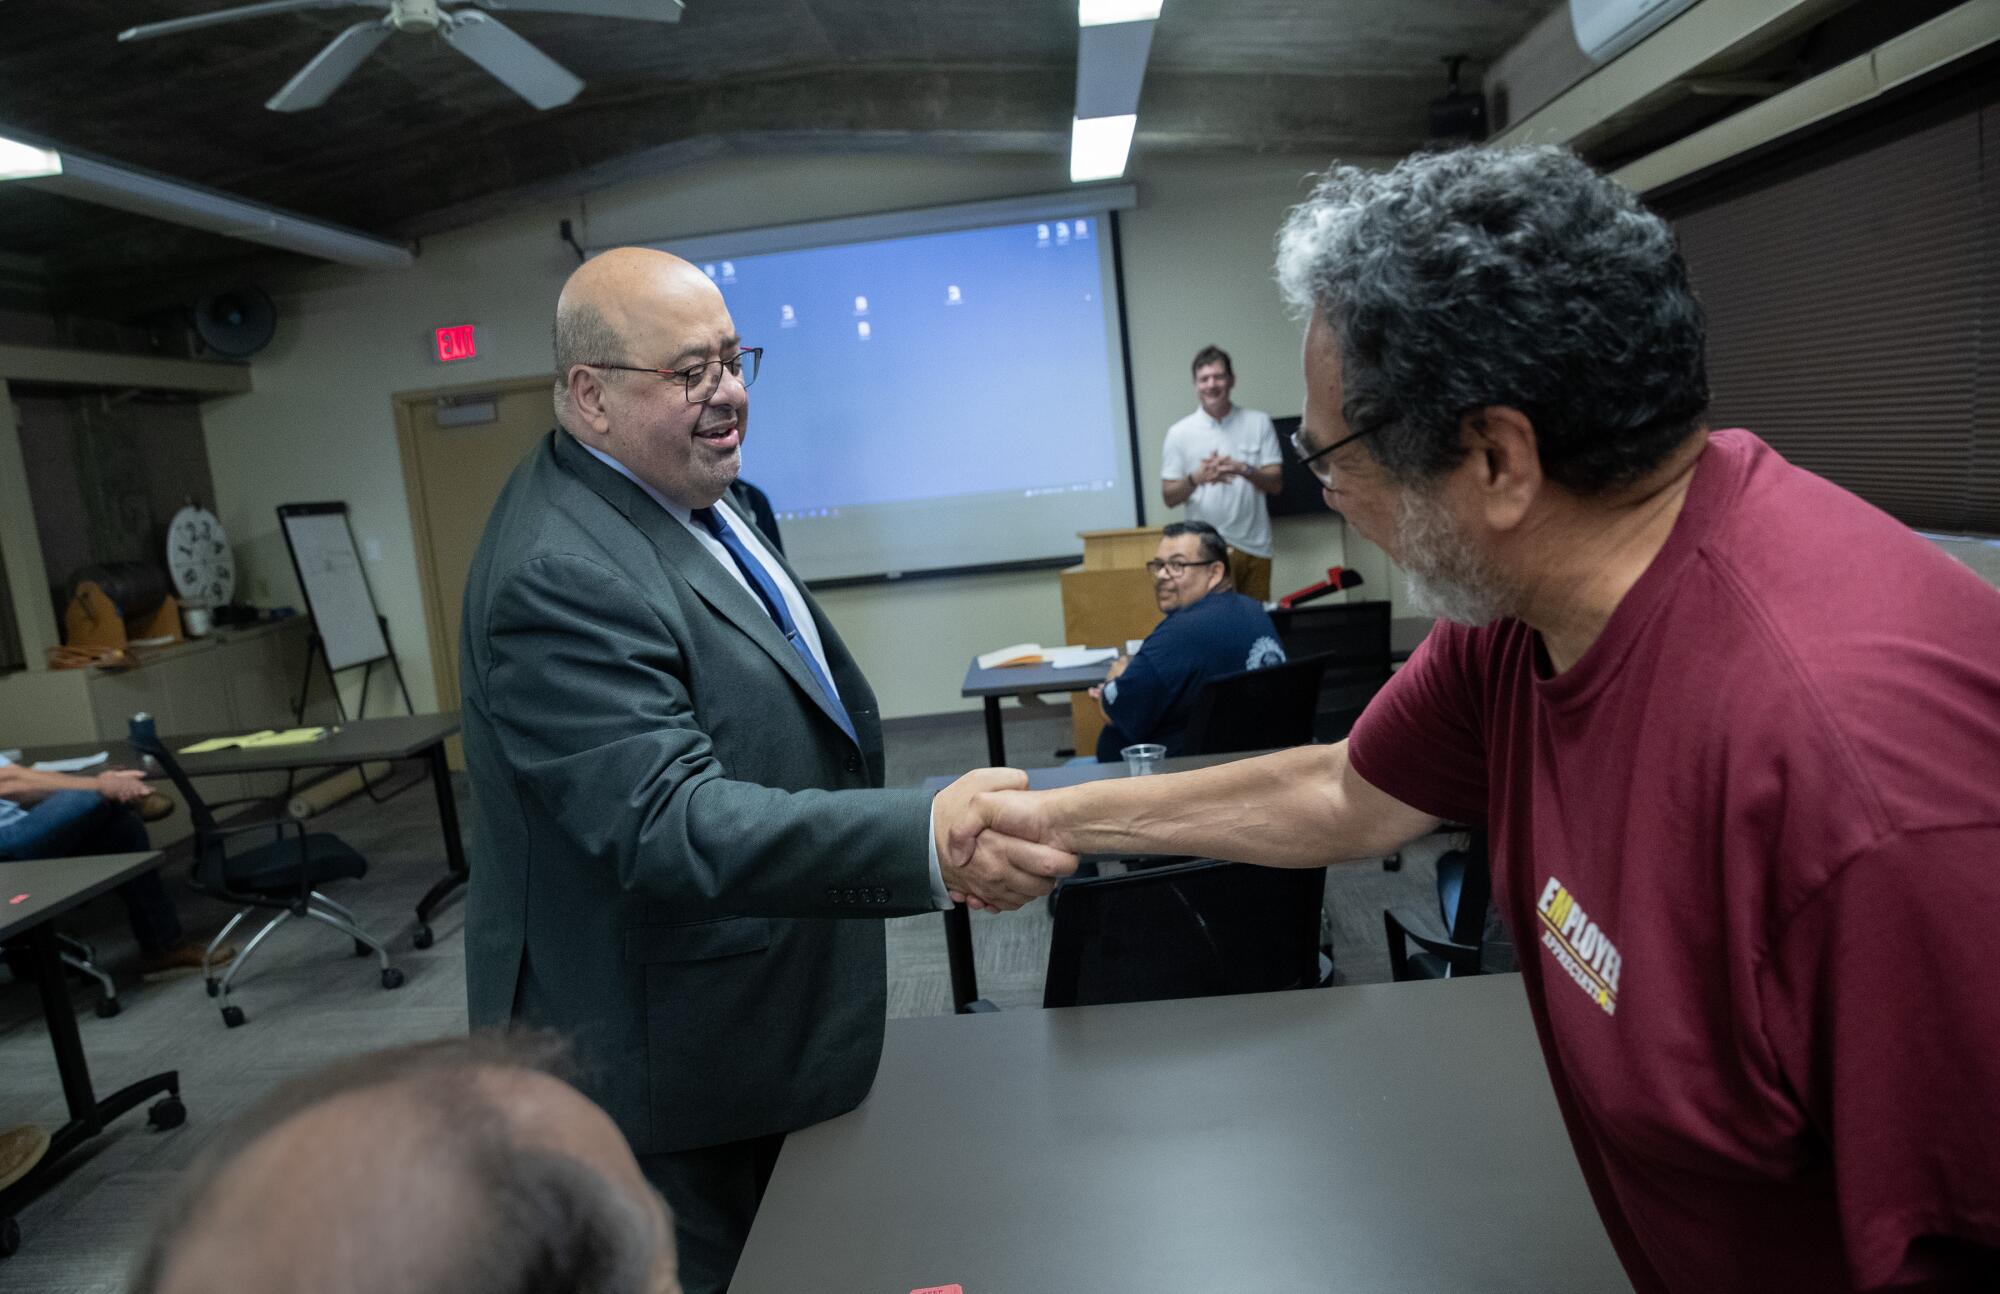 Adel Hagekhalil, wearing glasses and a large gray suit, shakes hands with a man wearing a red T shirt while at a presentation